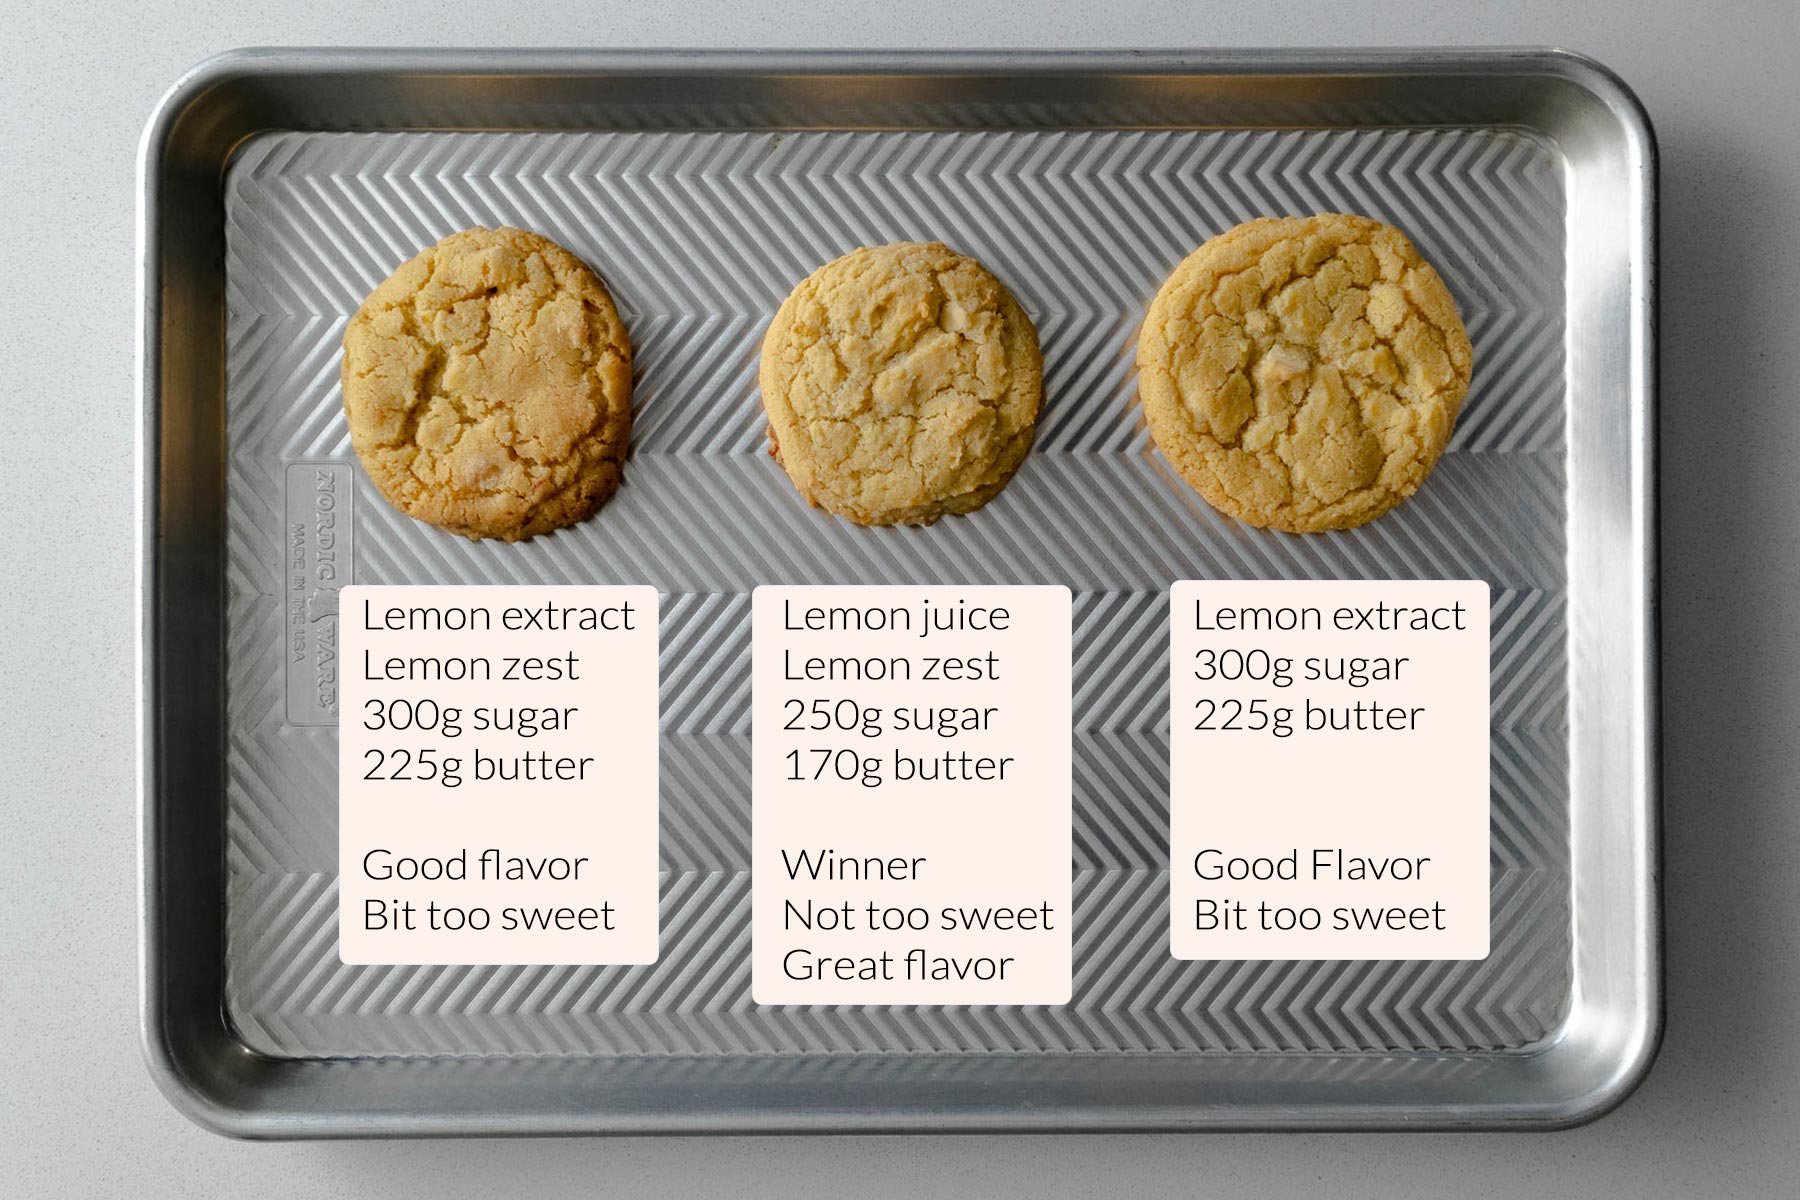 Lemon cookies testing results with different lemon flavorings and varying butter and sugar content.